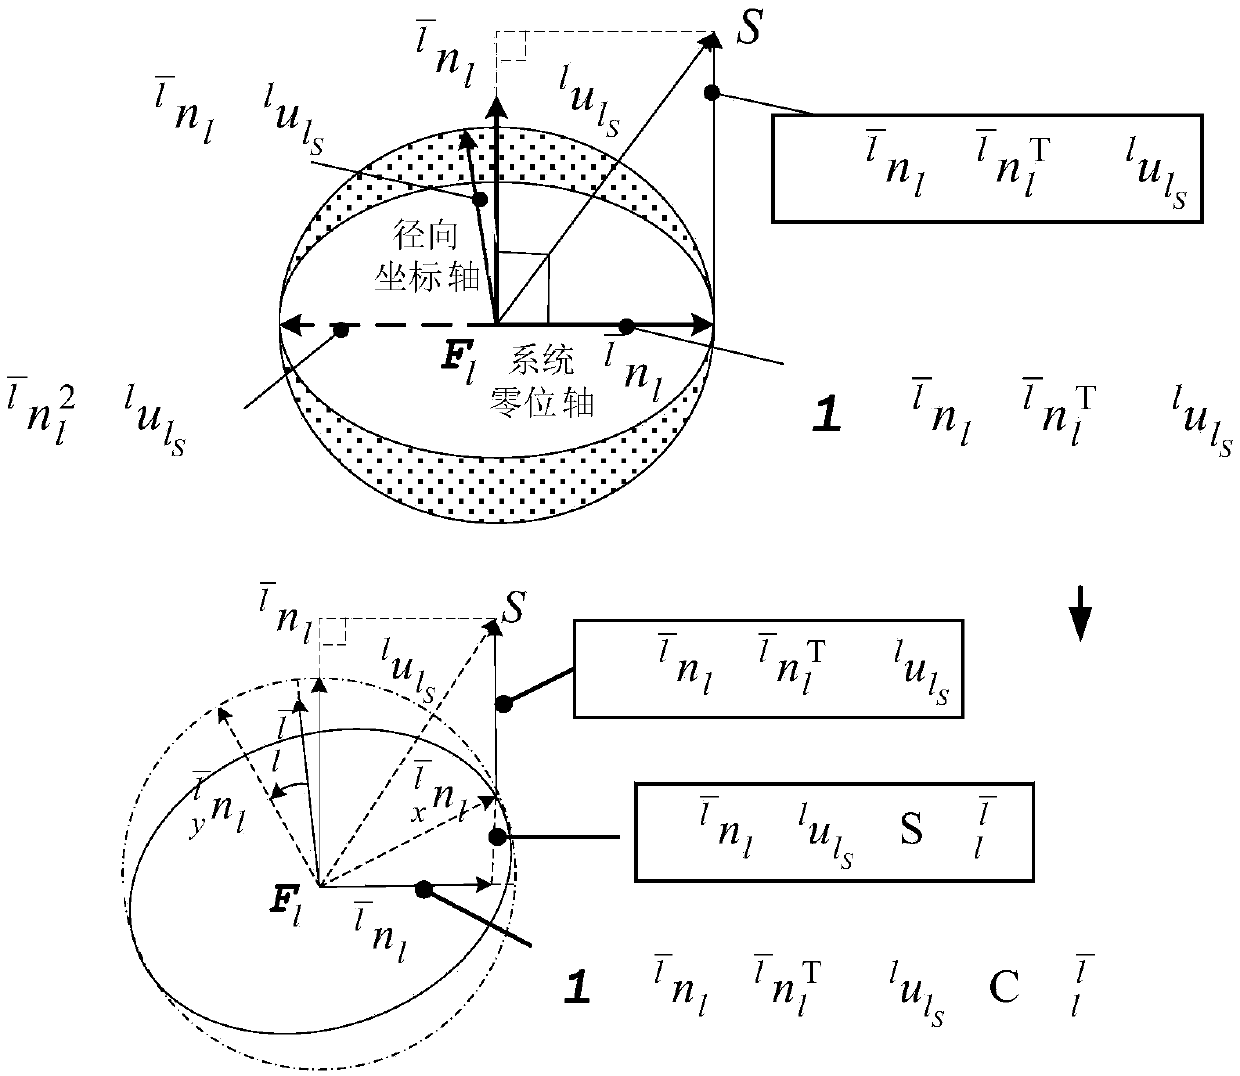 General inverse solution modeling and solving method of 7R manipulator based on axis invariant